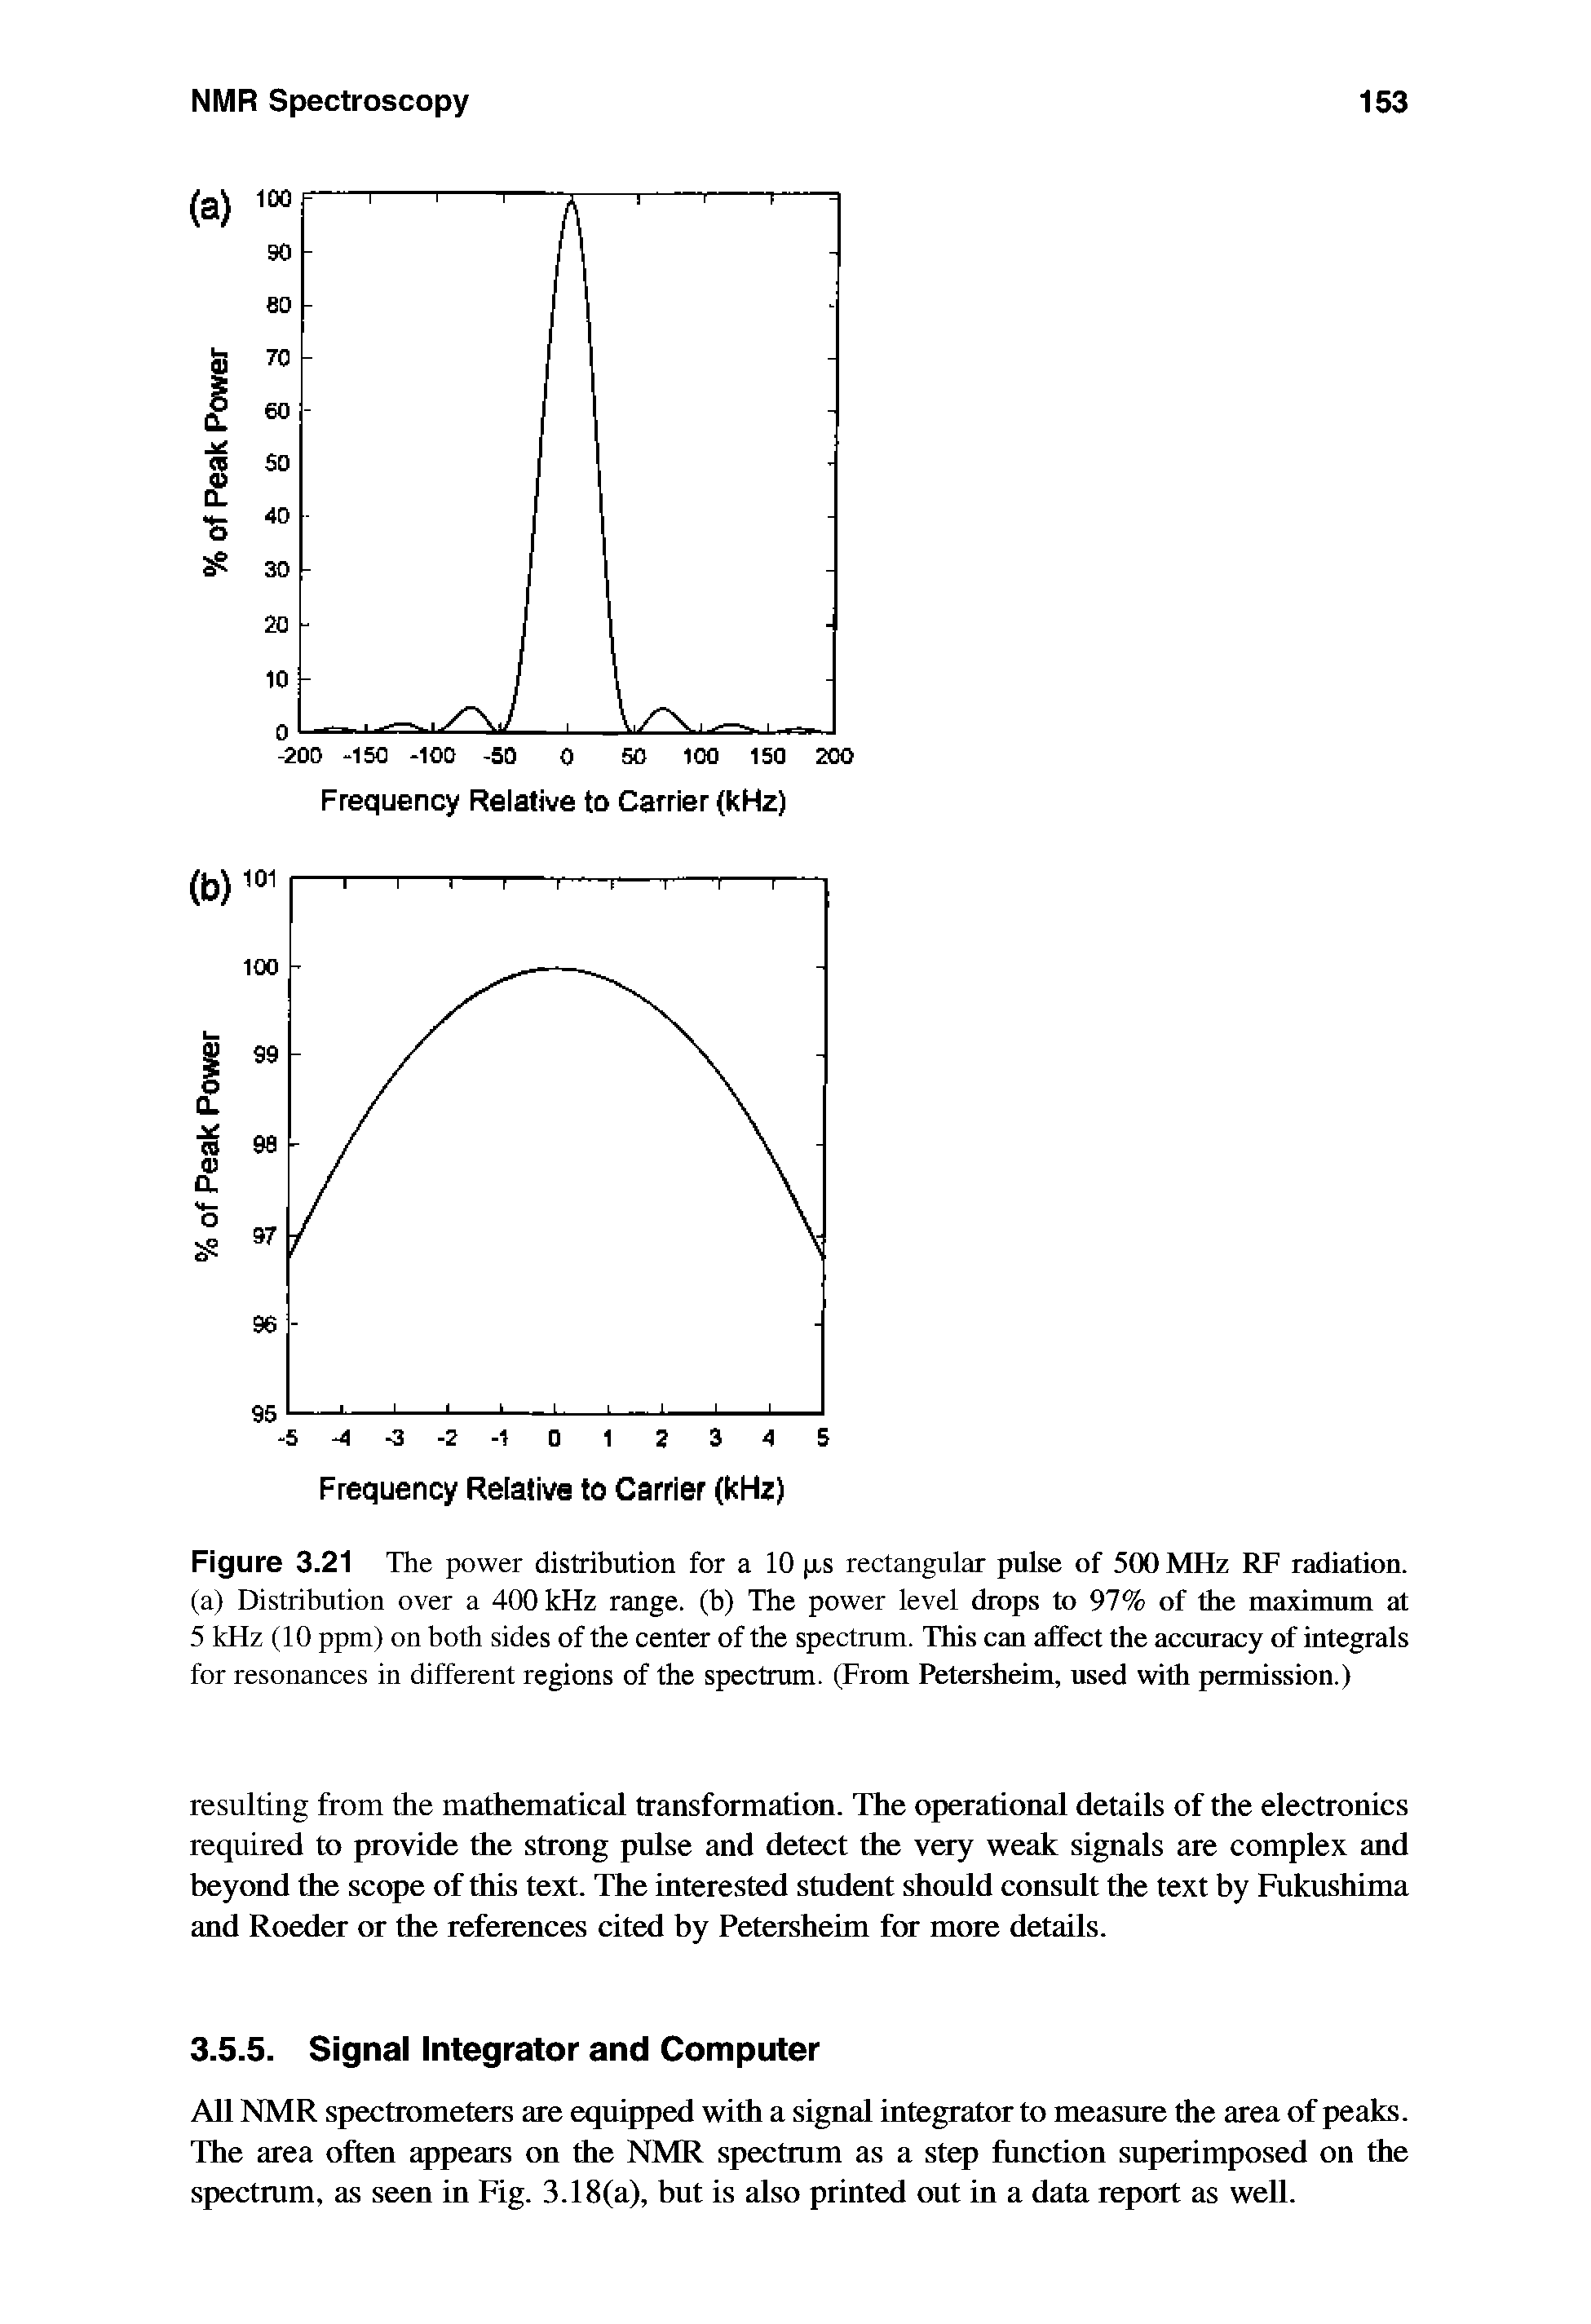 Figure 3.21 The power distribution for a 10 a,s rectangular pulse of 500 MHz RF radiation, (a) Distribution over a 400 kHz range, (b) The power level drops to 97% of the maximum at 5 kHz (10 ppm) on both sides of the center of the spectrum. This can affect the accuracy of integrals for resonances in different regions of the spectrum. (From Petersheim, used with permission.)...